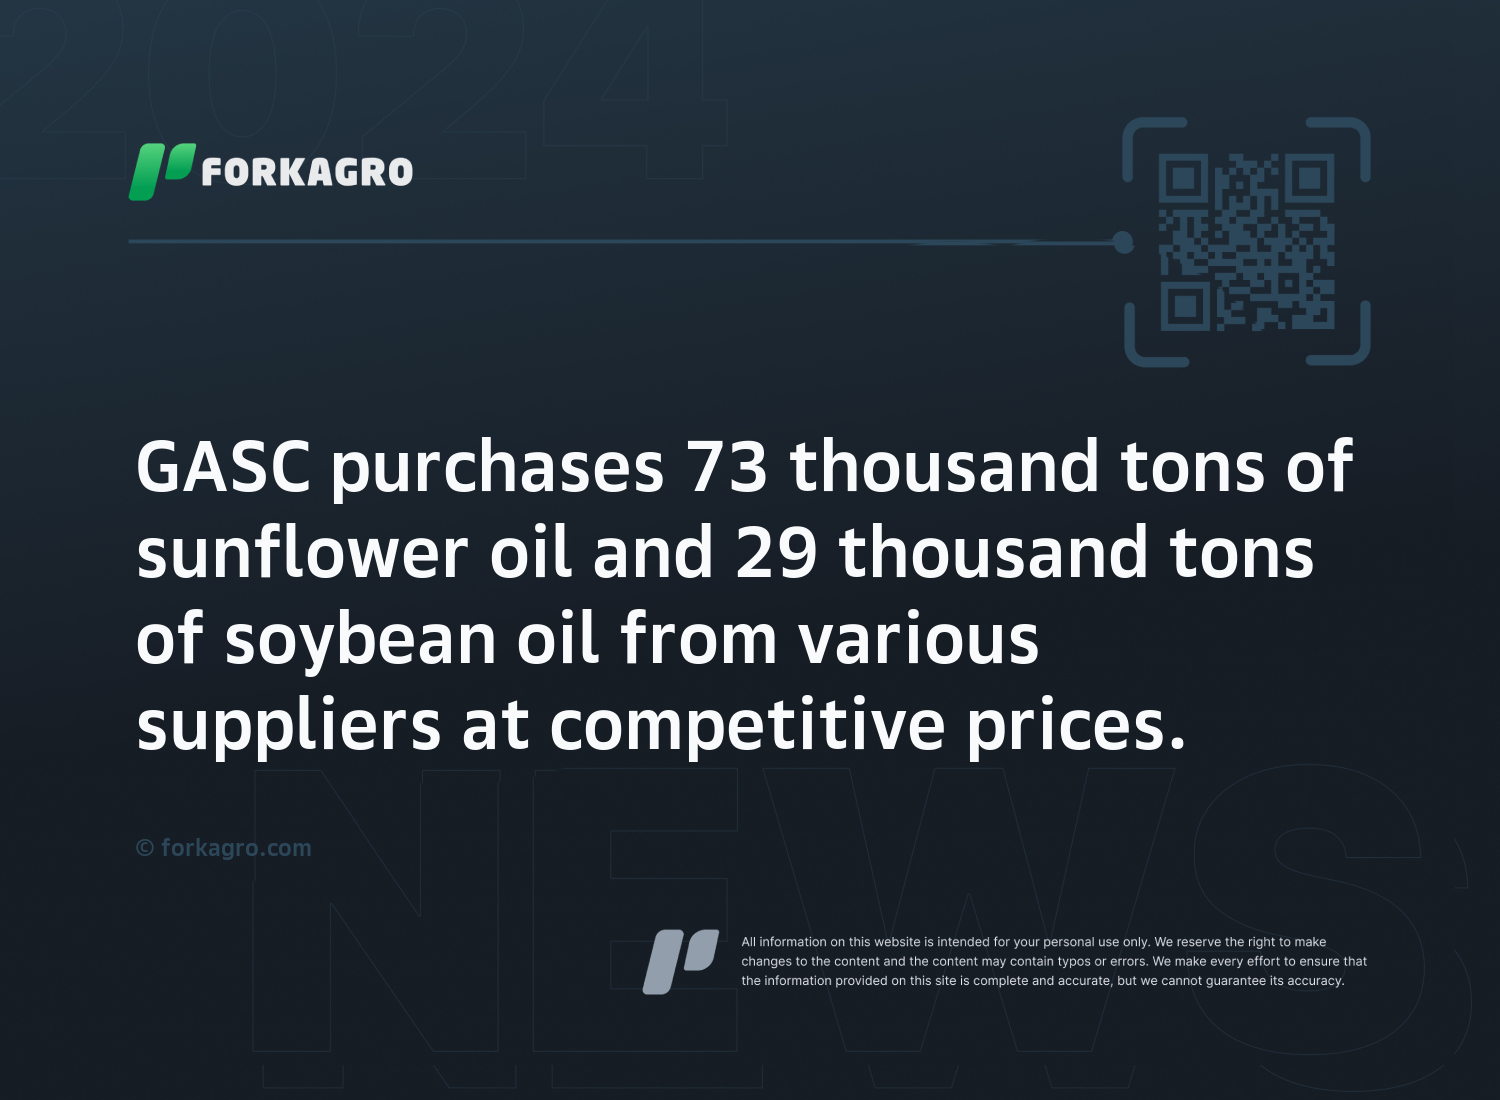 GASC purchases 73 thousand tons of sunflower oil and 29 thousand tons of soybean oil from various suppliers at competitive prices.